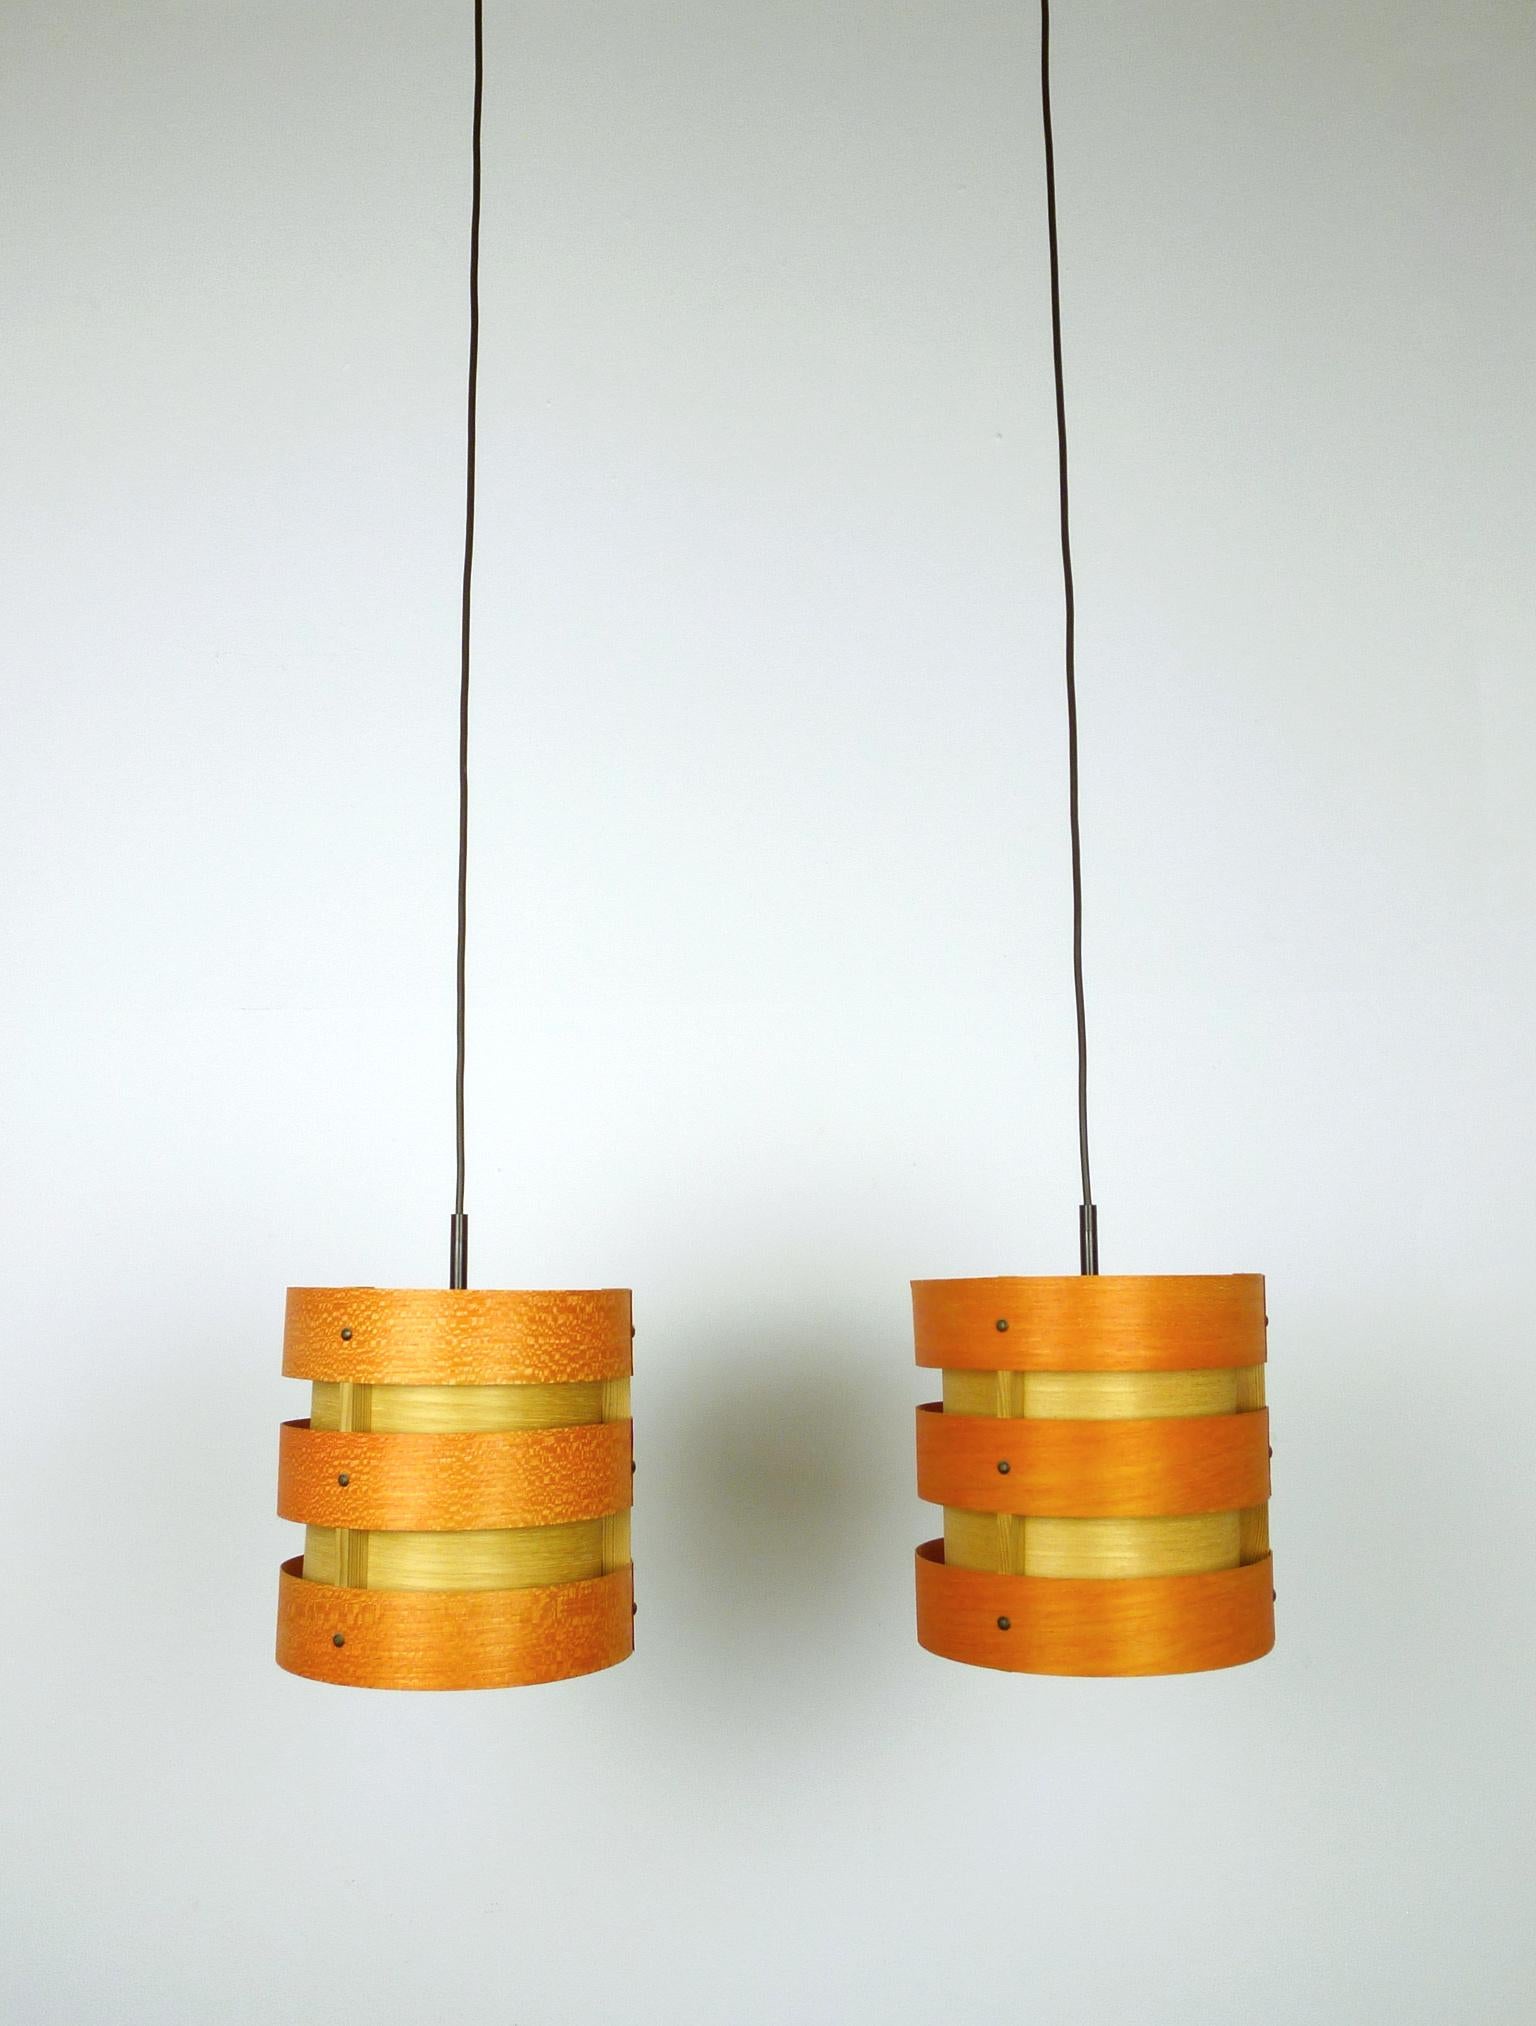 Set of two ceiling lights from the German manufacturer Zicoli from the 1970s. The lights consist of five overlapping veneer strips of ash wood, which are connected by narrow pine wood strips. The three outer rings are stained in orange. They are